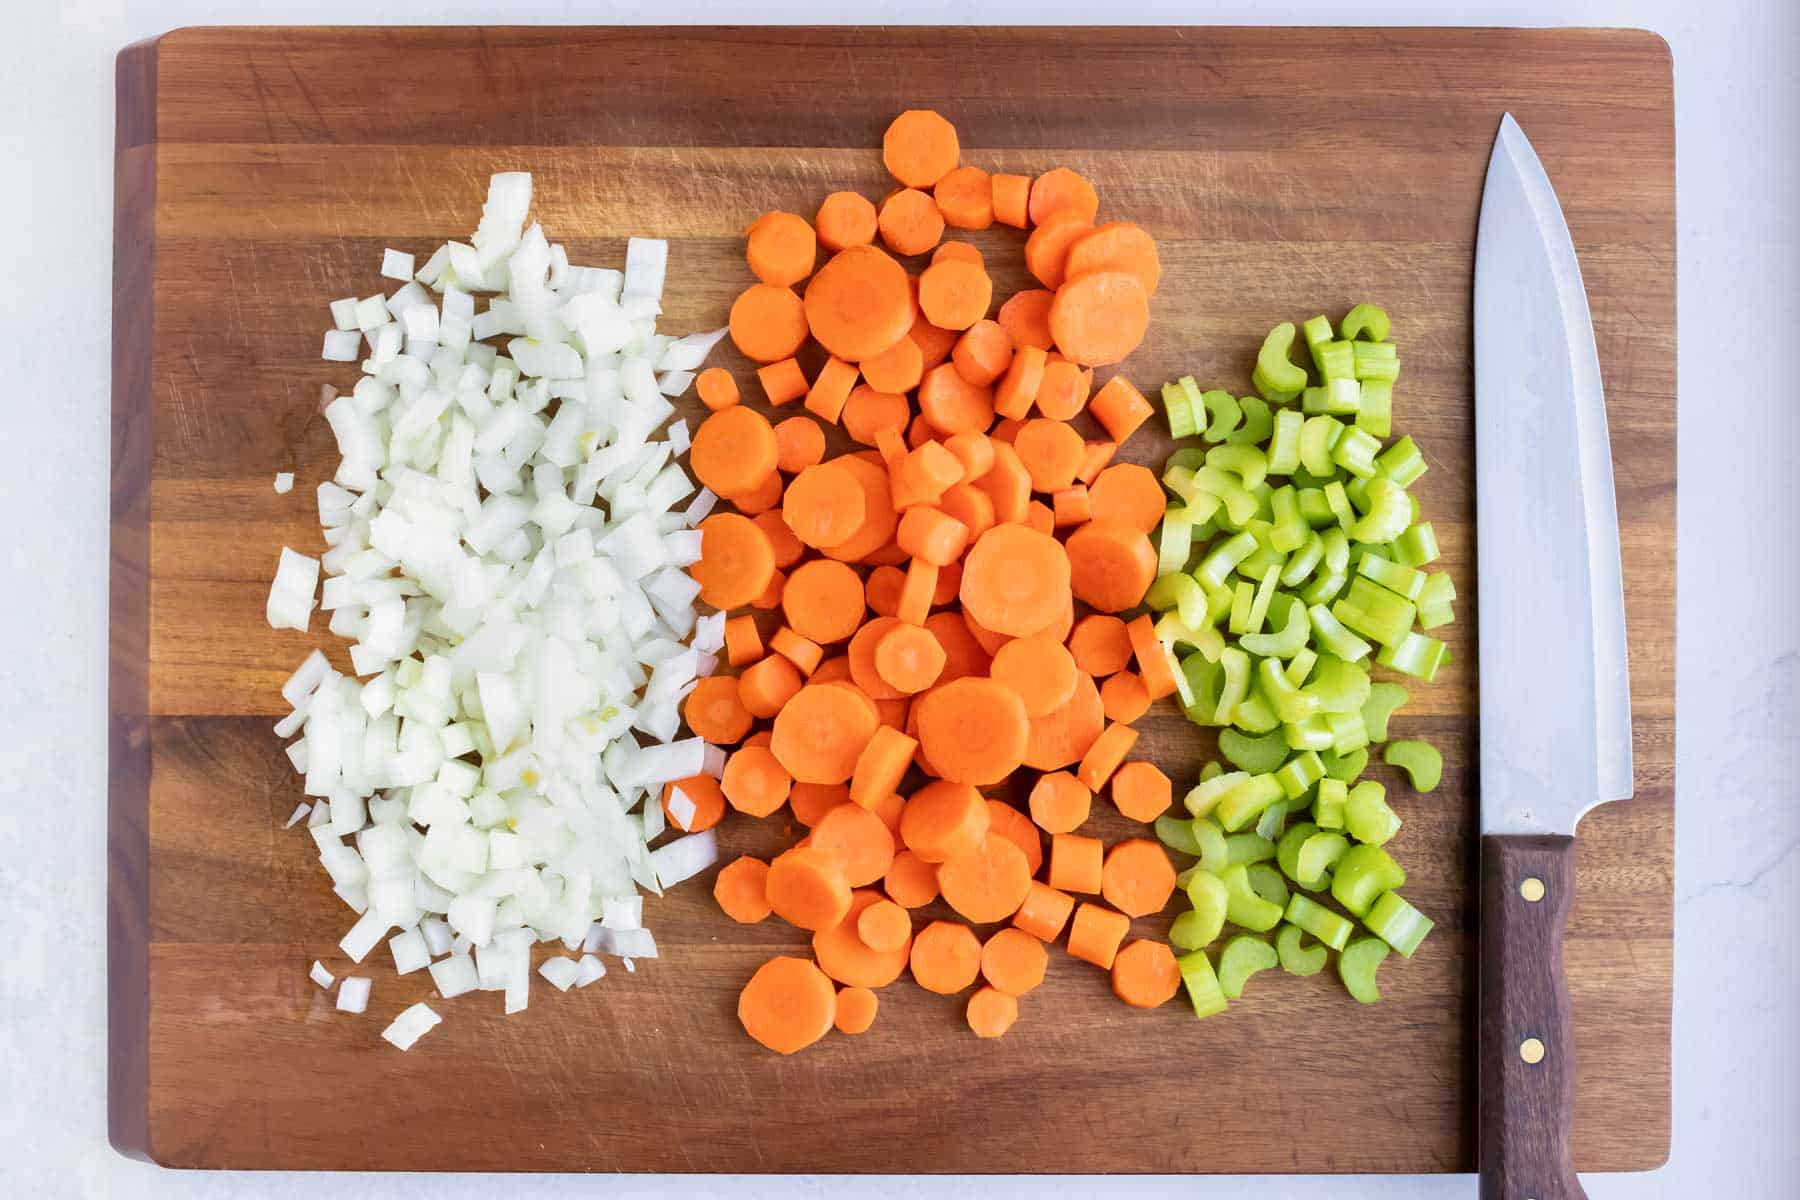 Onions, carrots, and celery are diced on a cutting board.